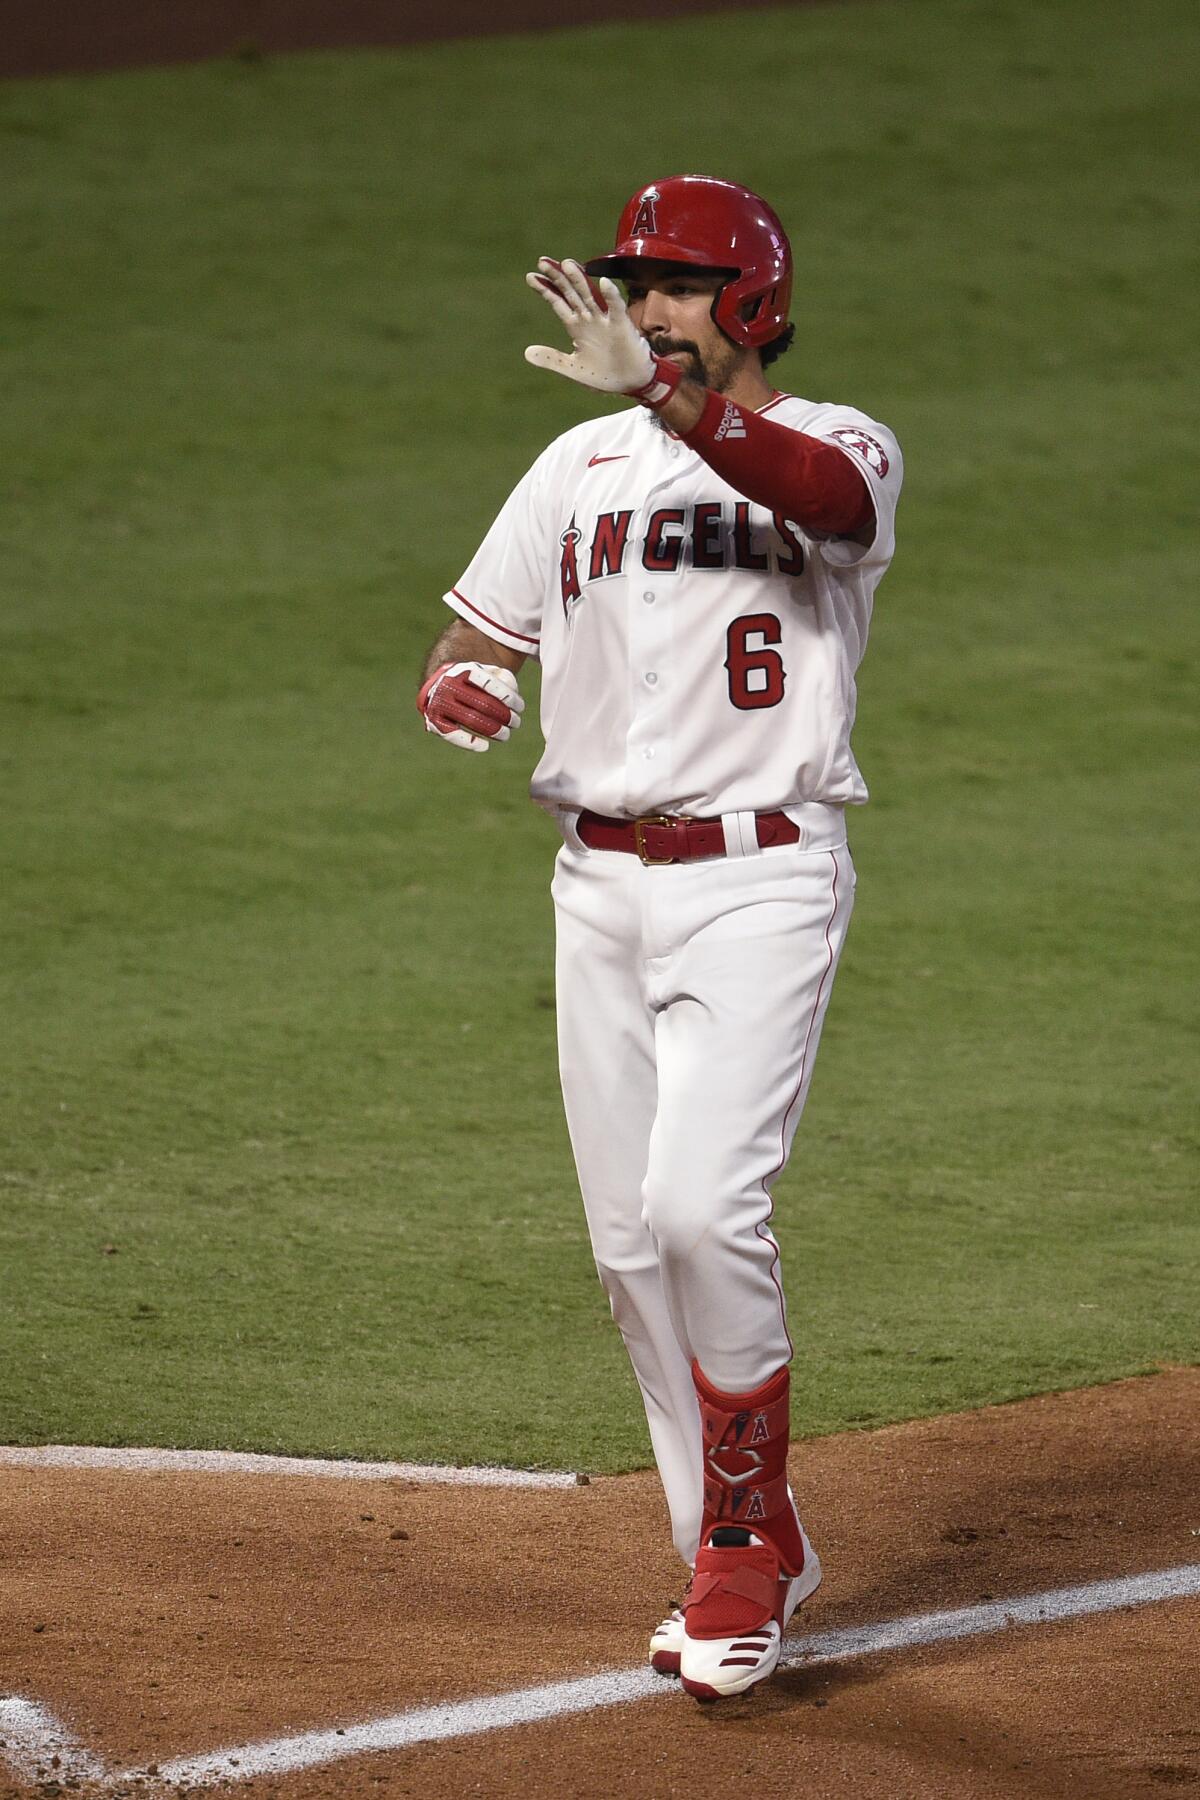 The Angels' Anthony Rendon homered against the Oakland Athletics on Aug. 11, 2020.